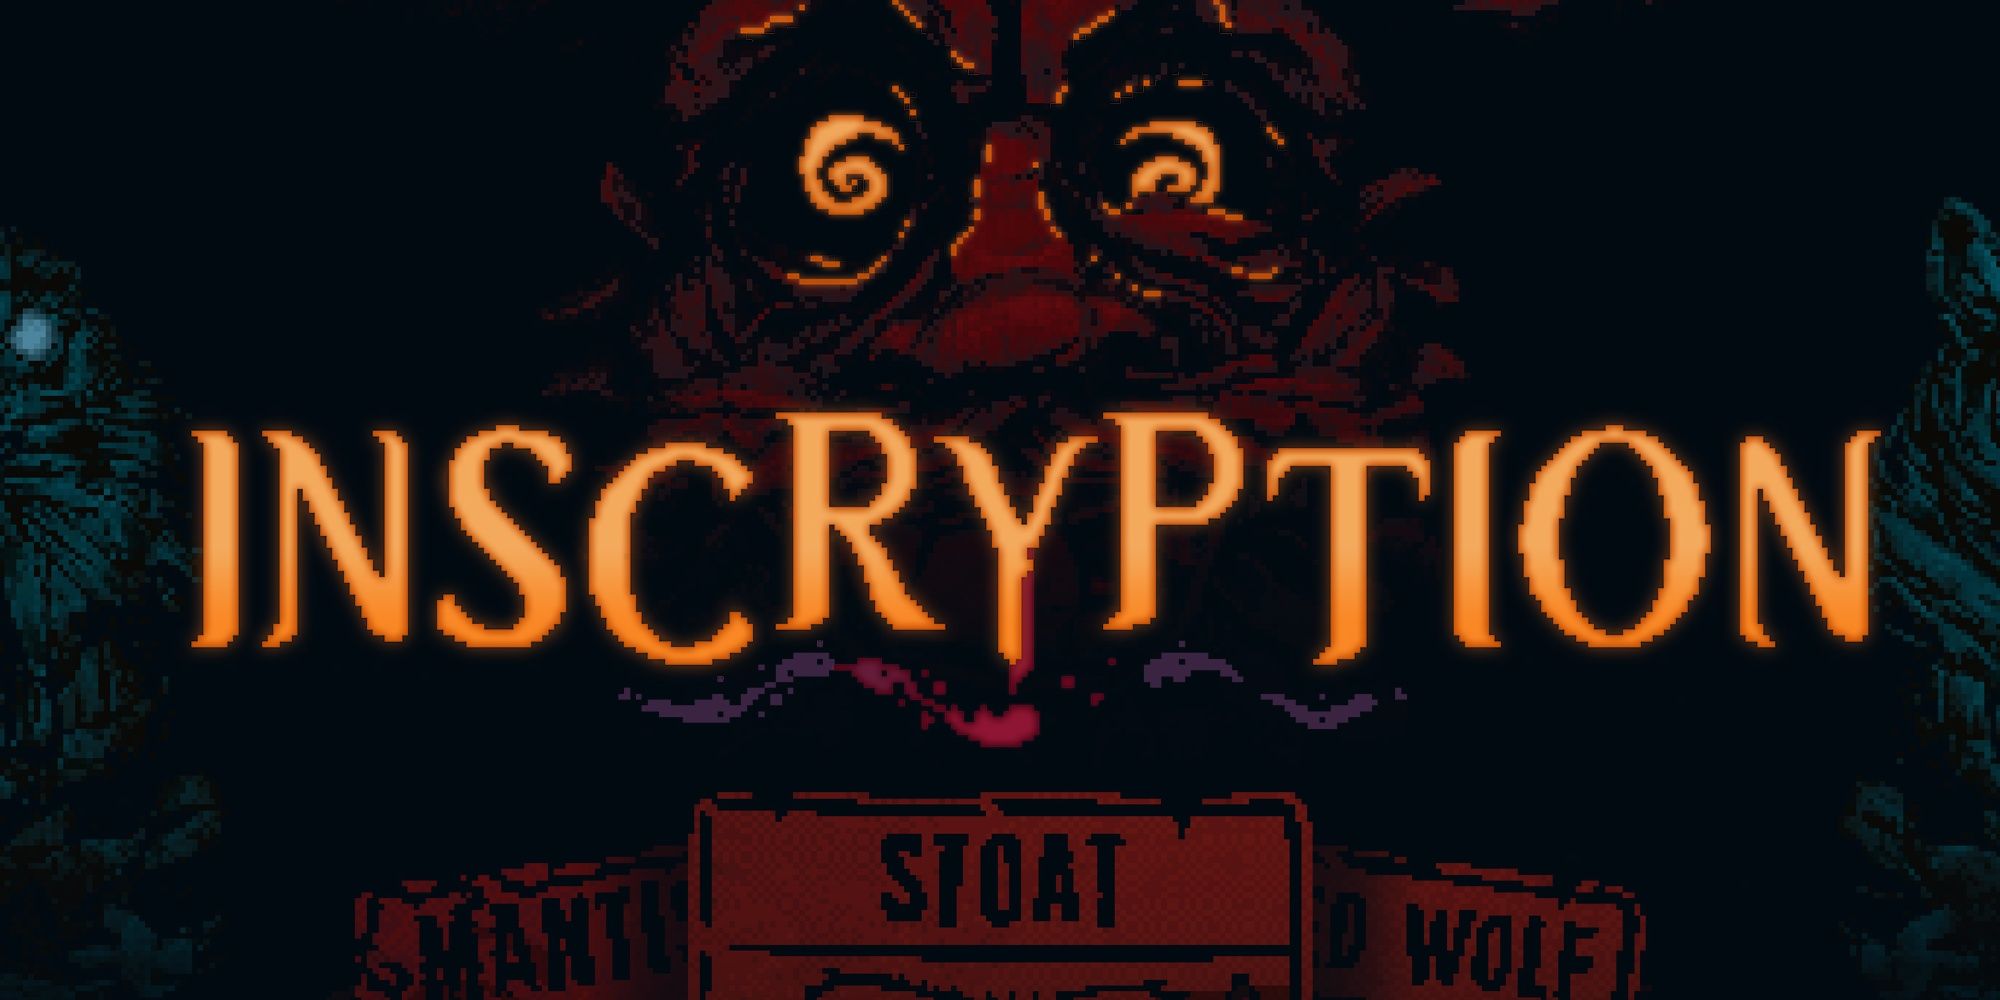 Inscryption Game Logo With Leshy's Eyes Behind It